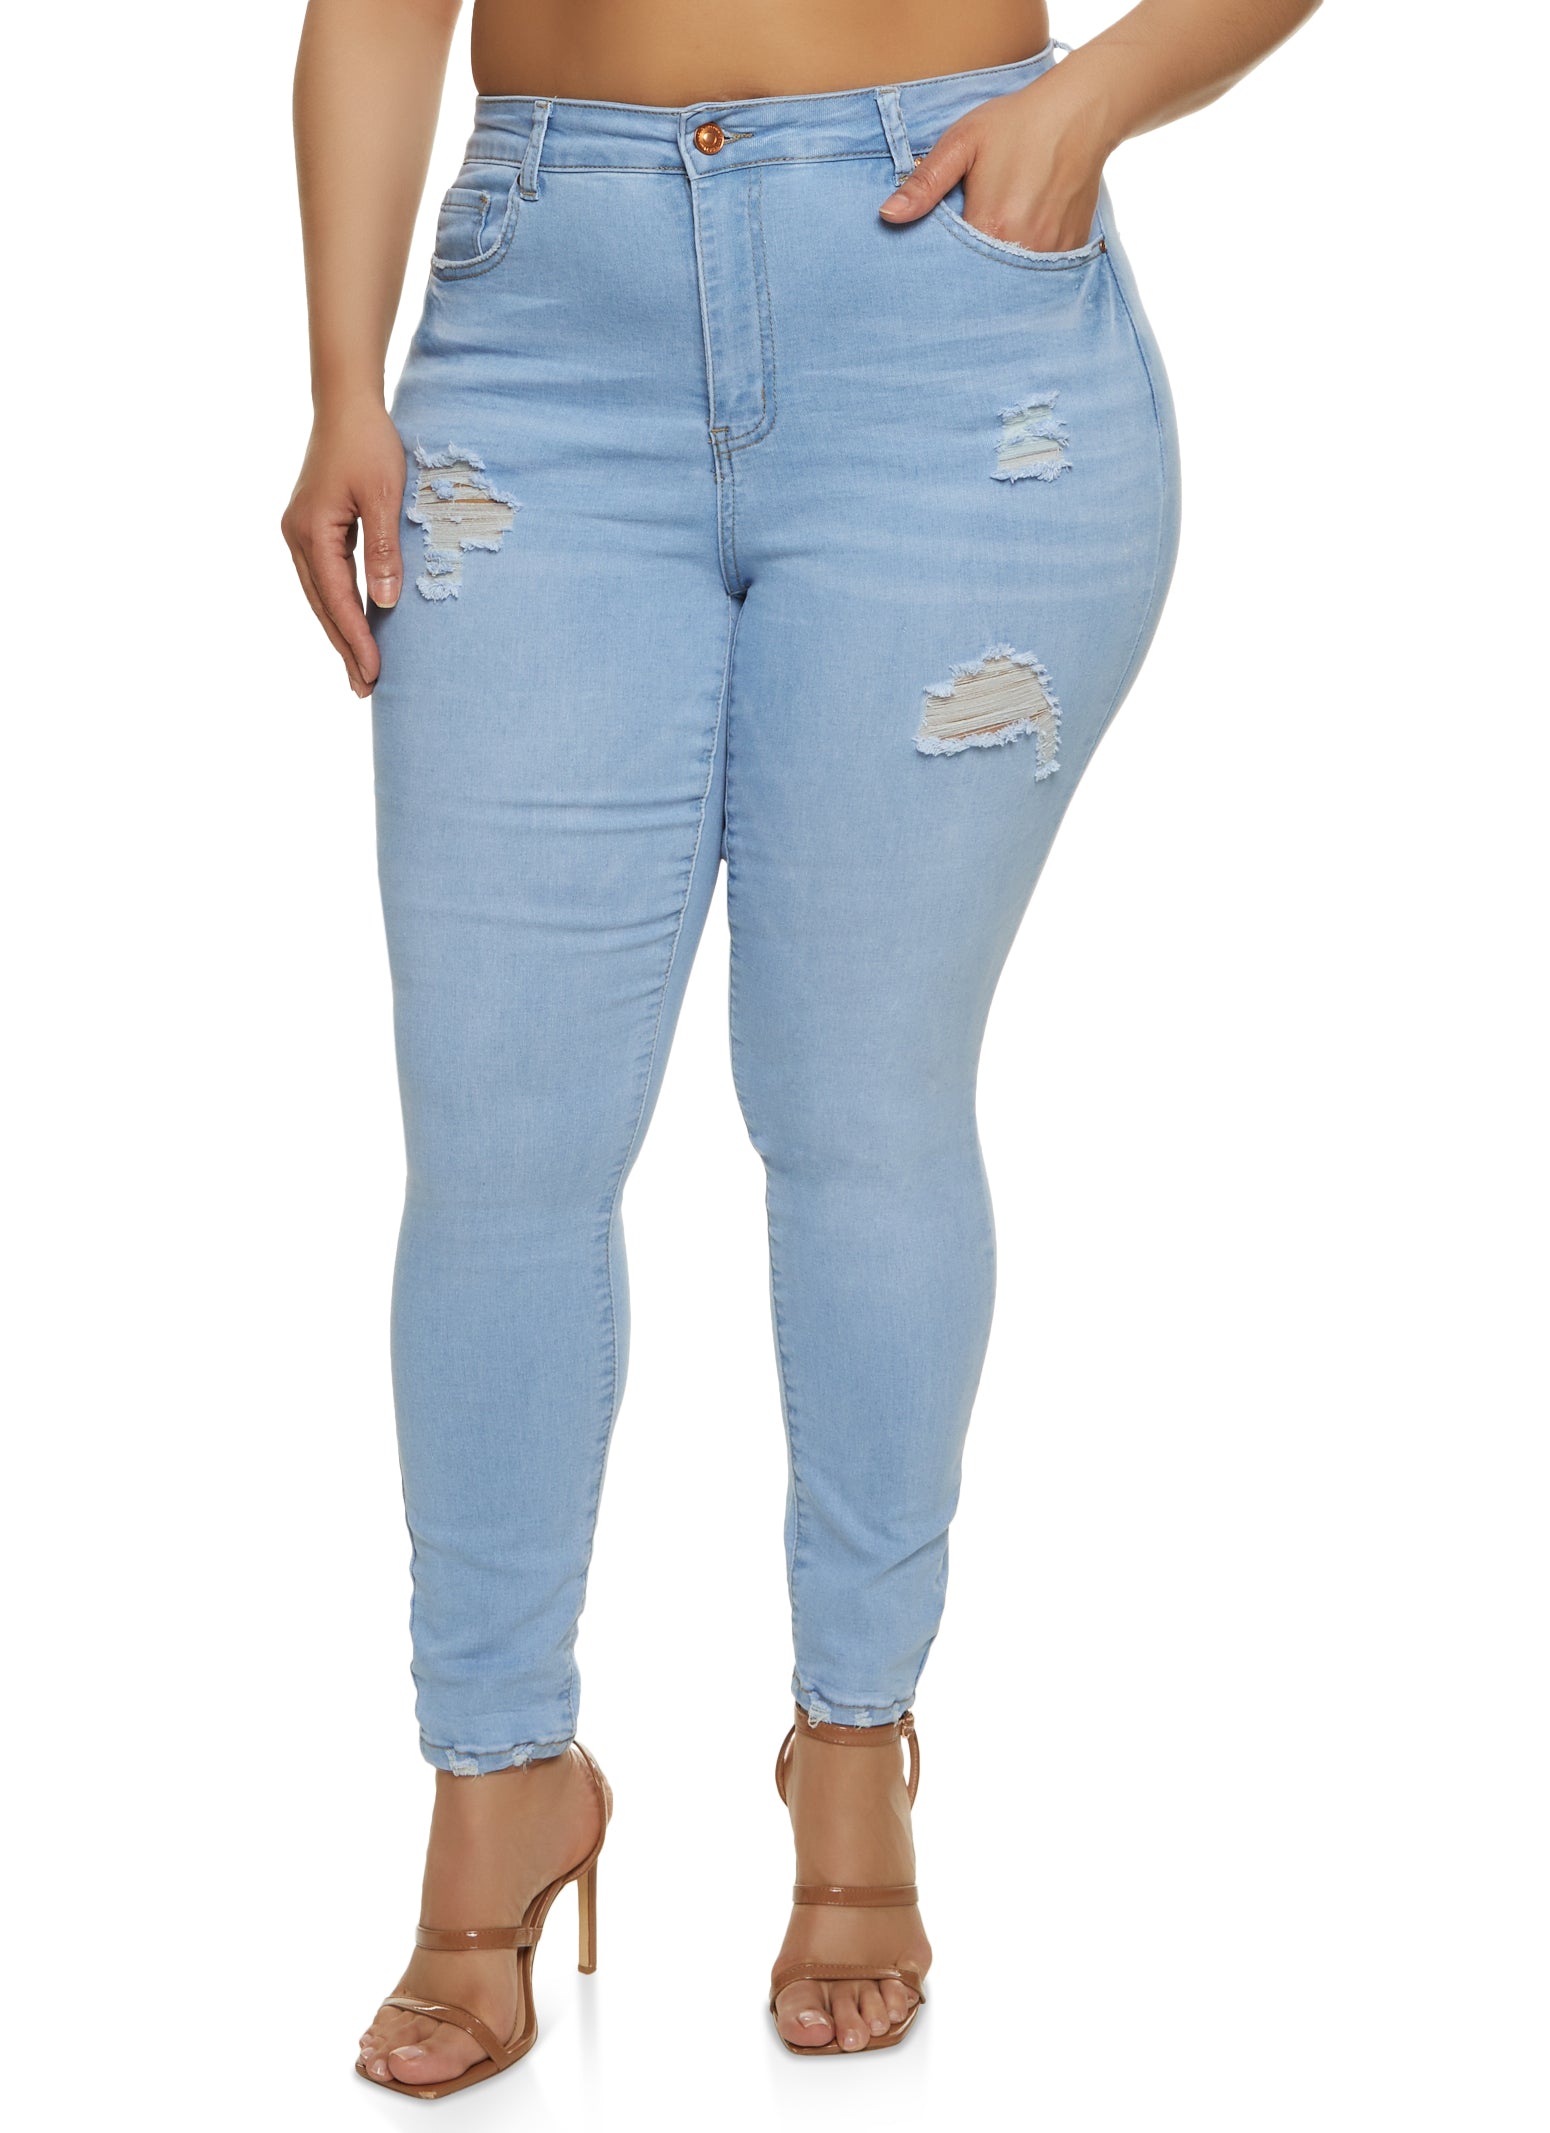 Plus Size WAX High Waisted Distressed Jeans - Light Wash